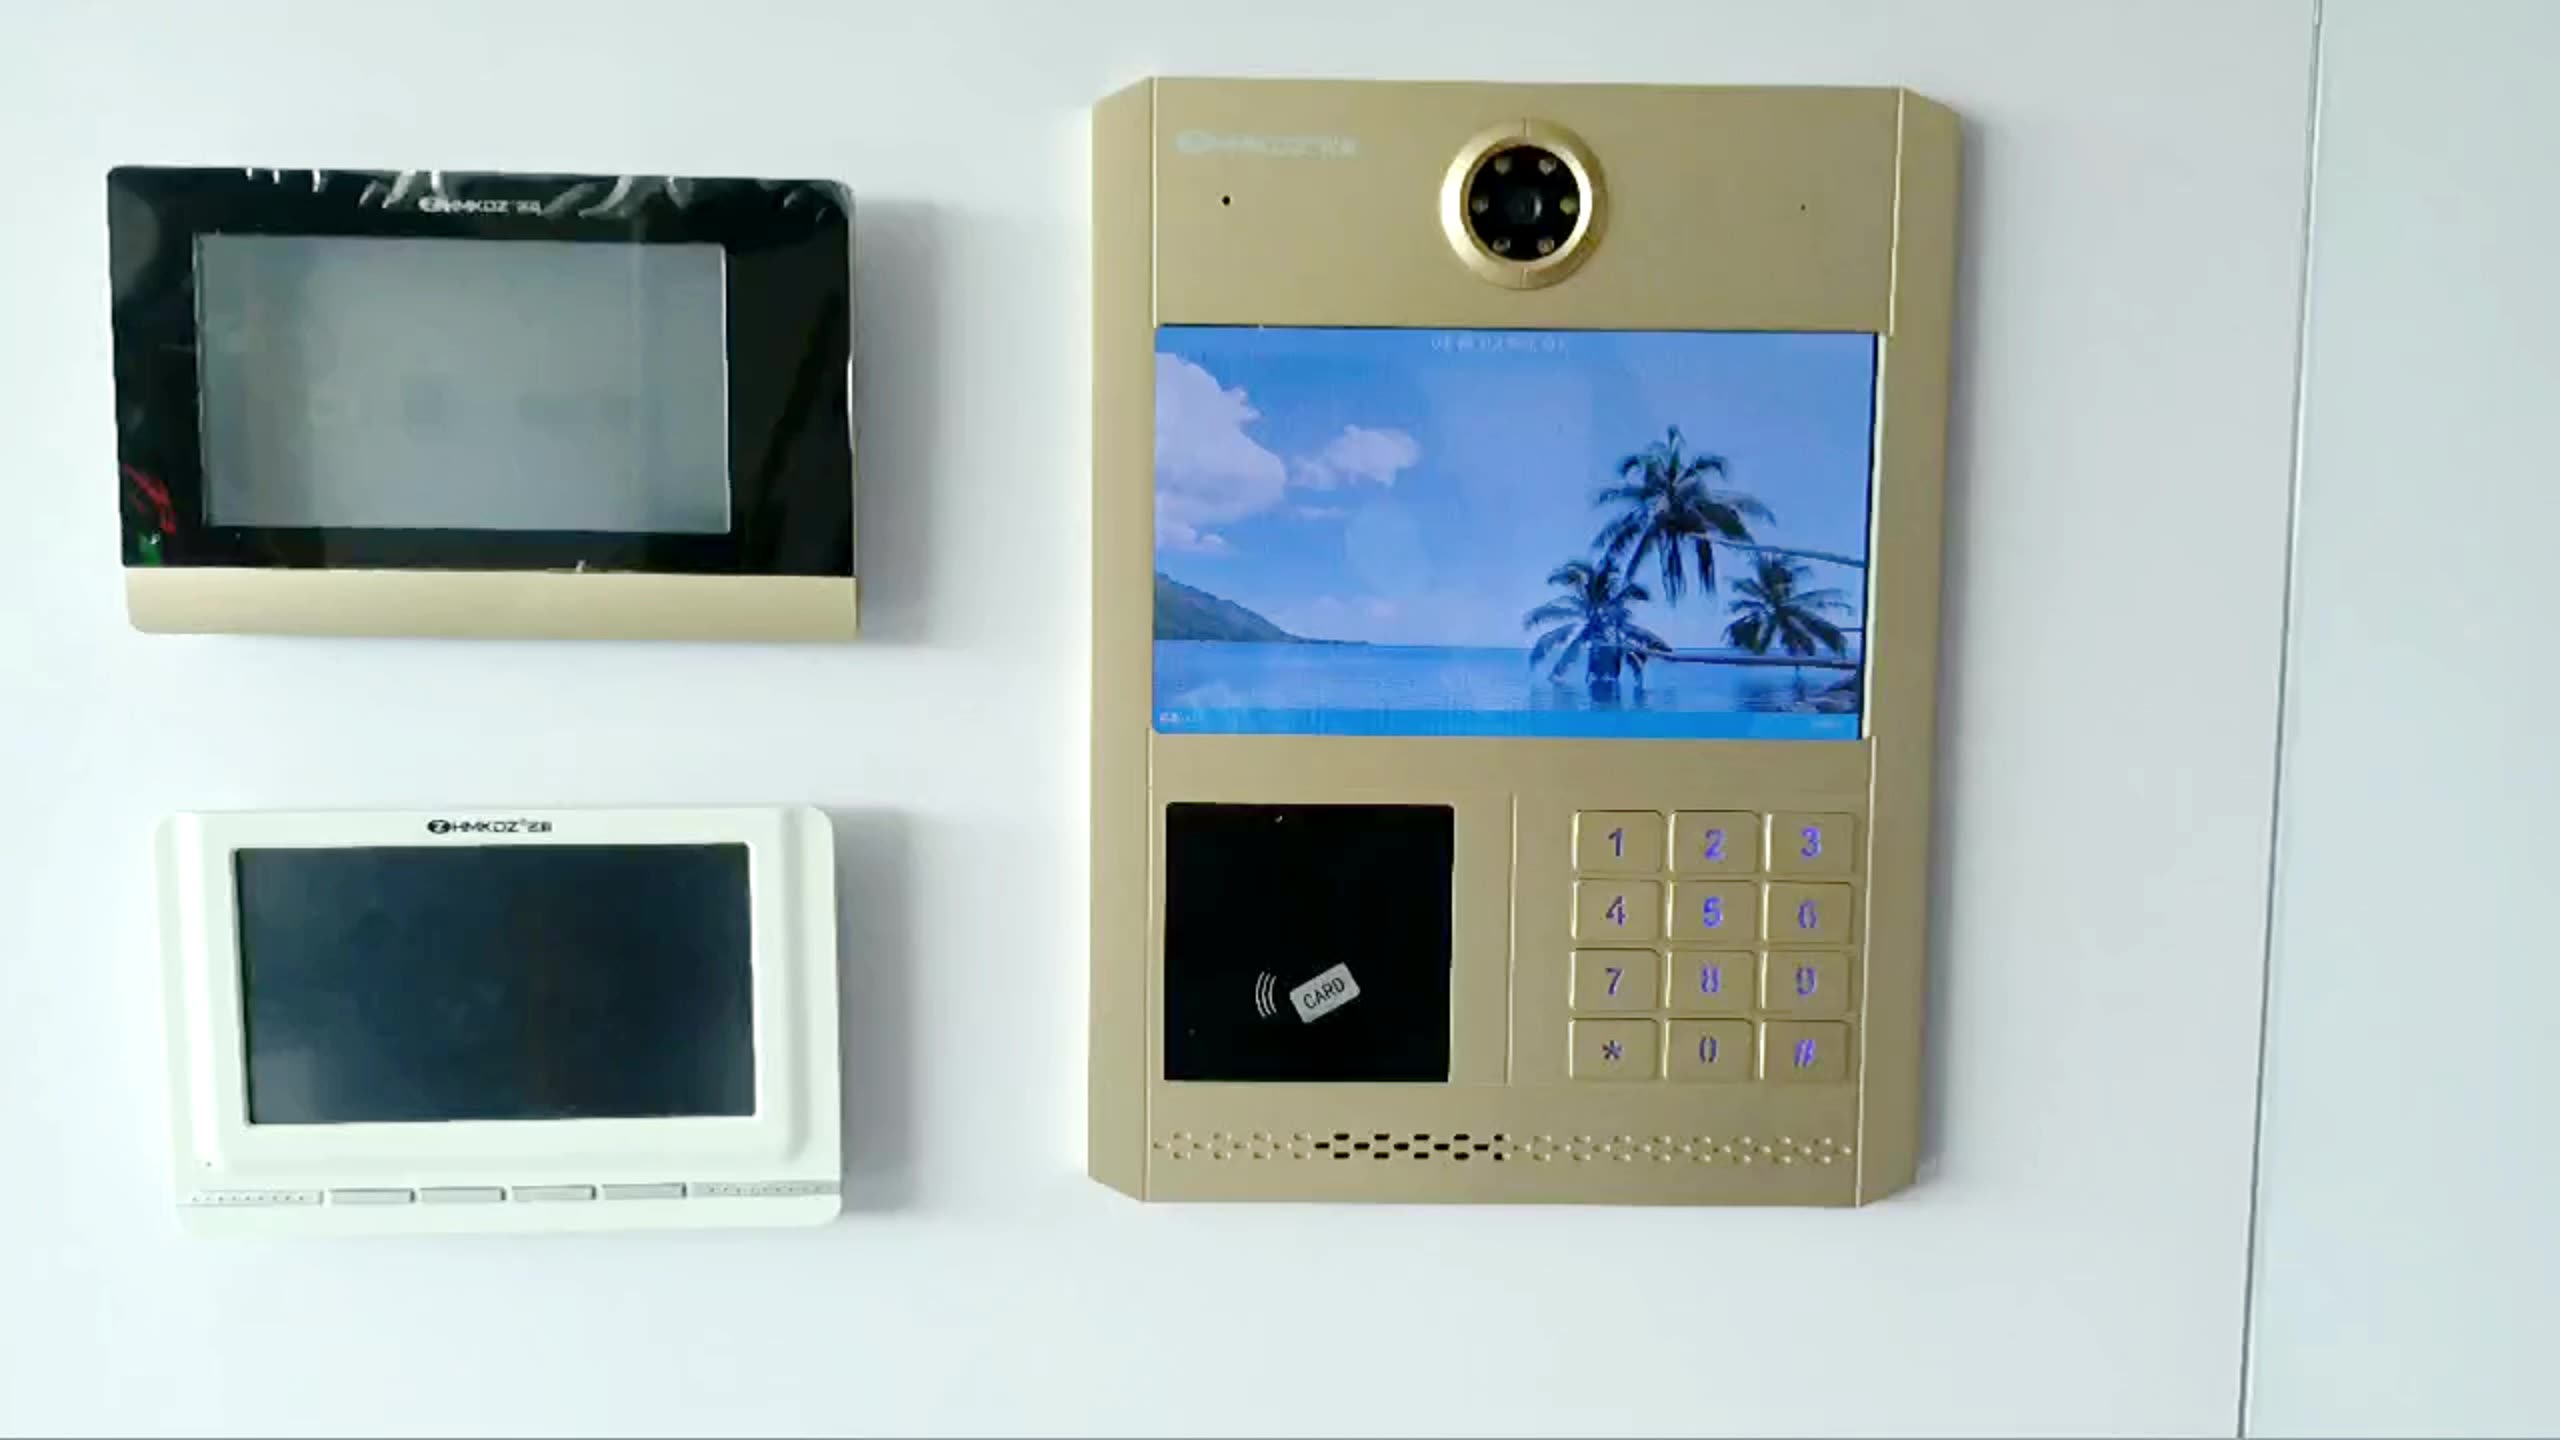 Morden Style Design Building Collective Apartment Intercom Entry System Kit Video Door Phone App1